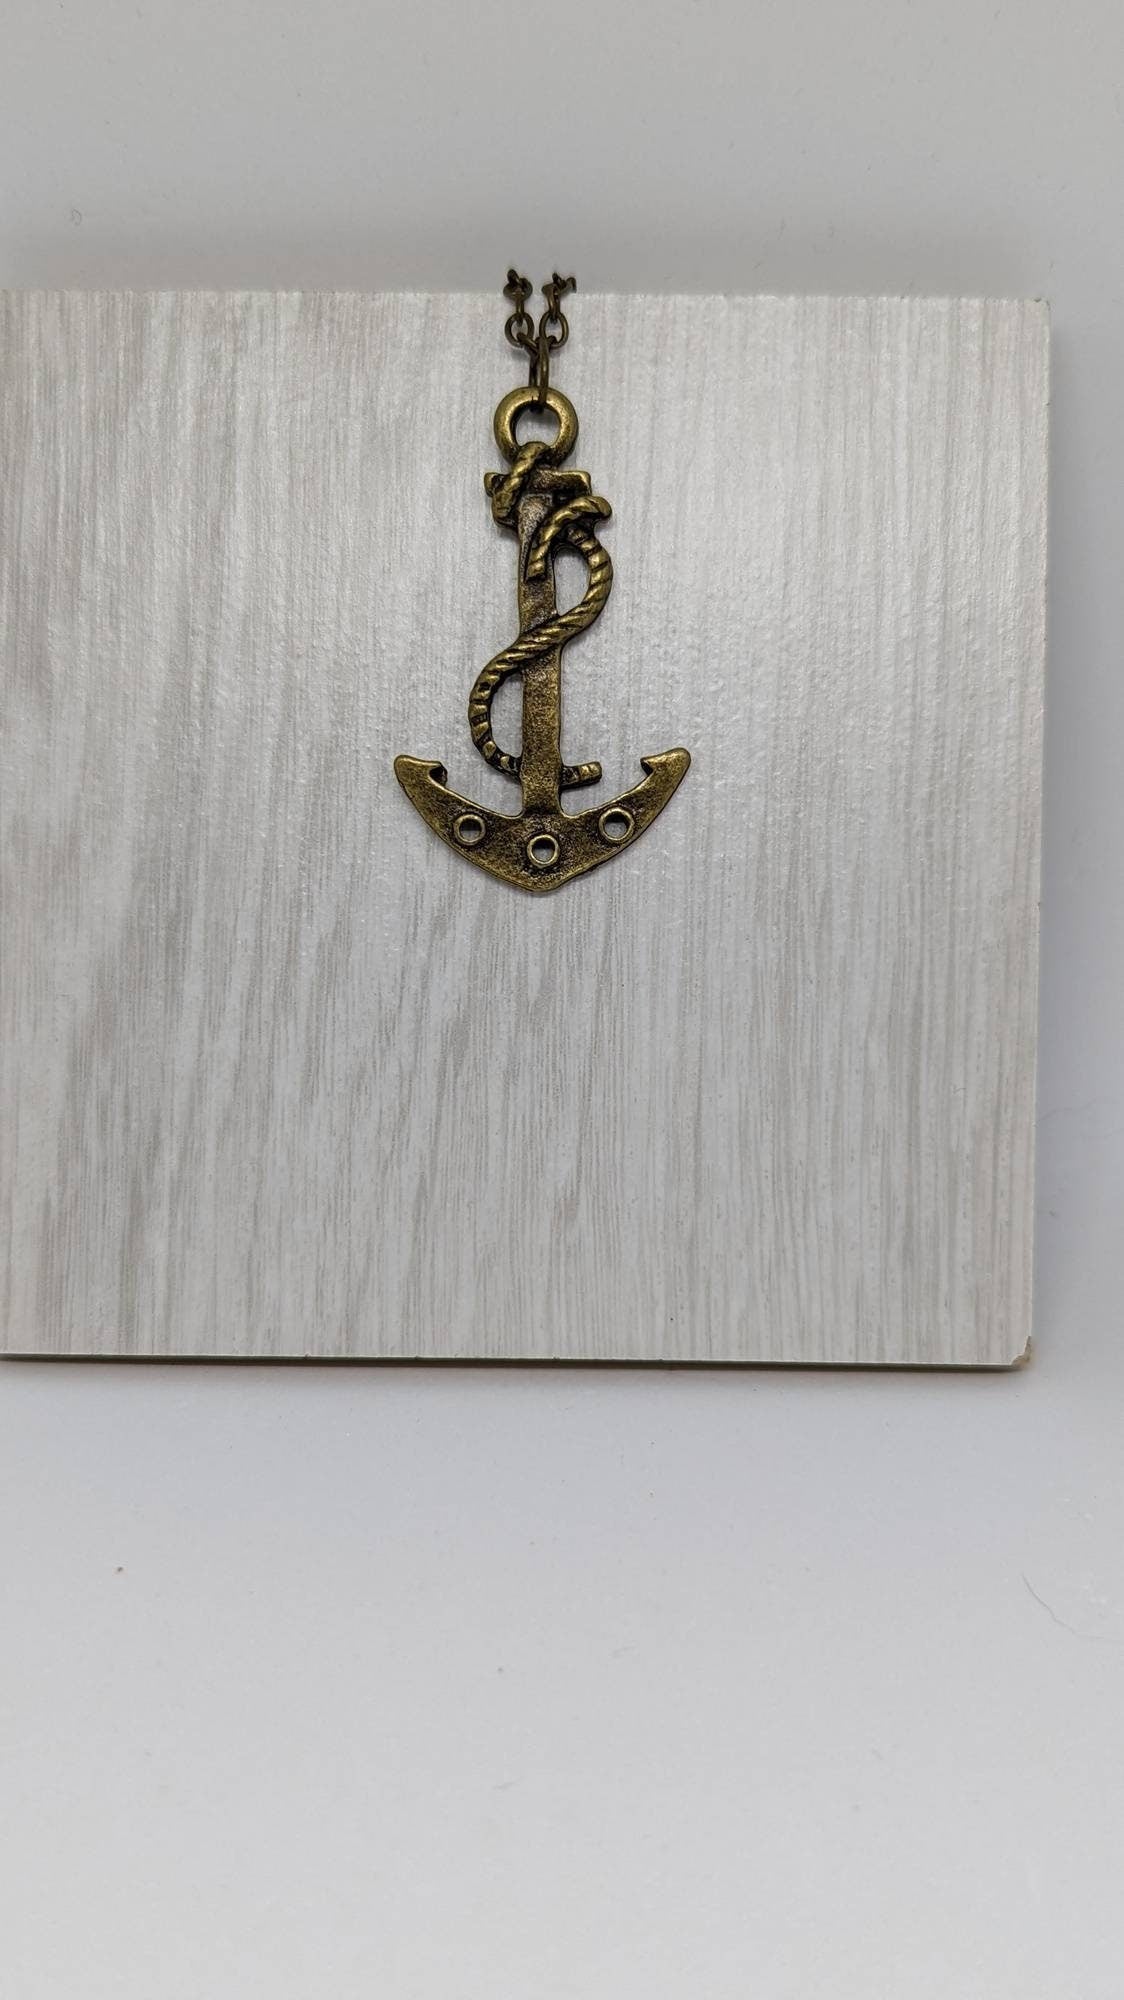 Anchor necklace, nautical necklace, bronze anchor, anchor pendant, gift for her, nautical jewelry, anchor charm, anchor jewelery